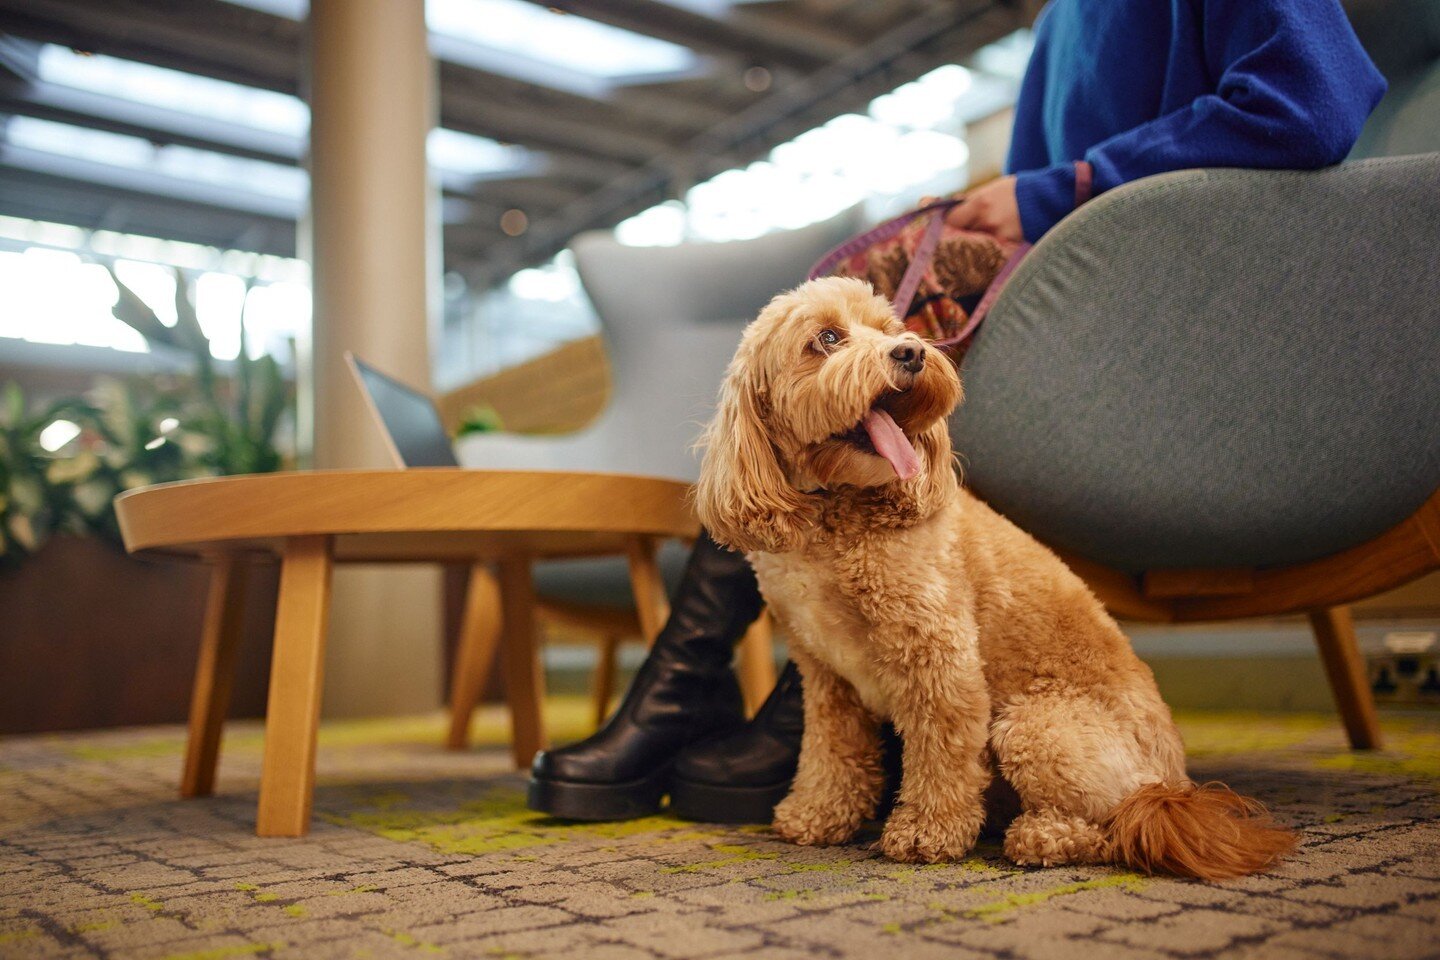 Guess who's ready for Monday 💪🐶⁣
⁣
Did you know Glasshouse Atrium is dog friendly? ⁣
⁣
Workspace available now ➡️ ⁣
💡Coworking⁣
💡Leased offices ⁣
💡On-site gym, pub and parking⁣
💡100GB connectivity⁣
💡Thriving tech cluster⁣
⁣
#dogfriendly #chesh